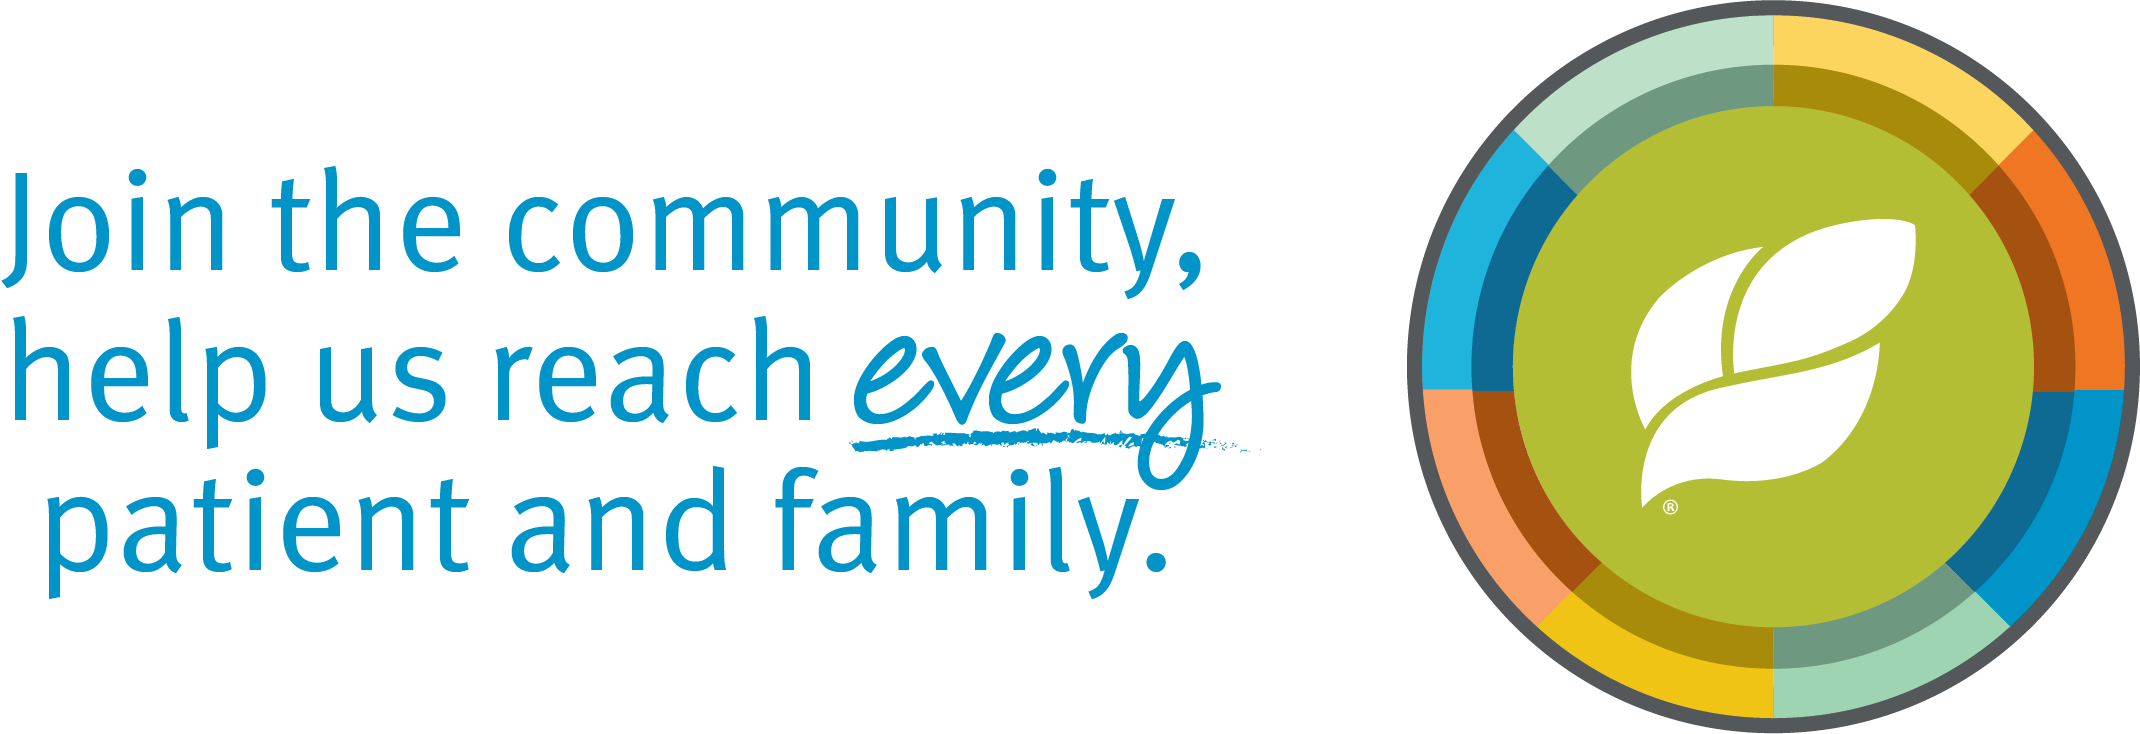 Join the community, help us reach every patient and family.